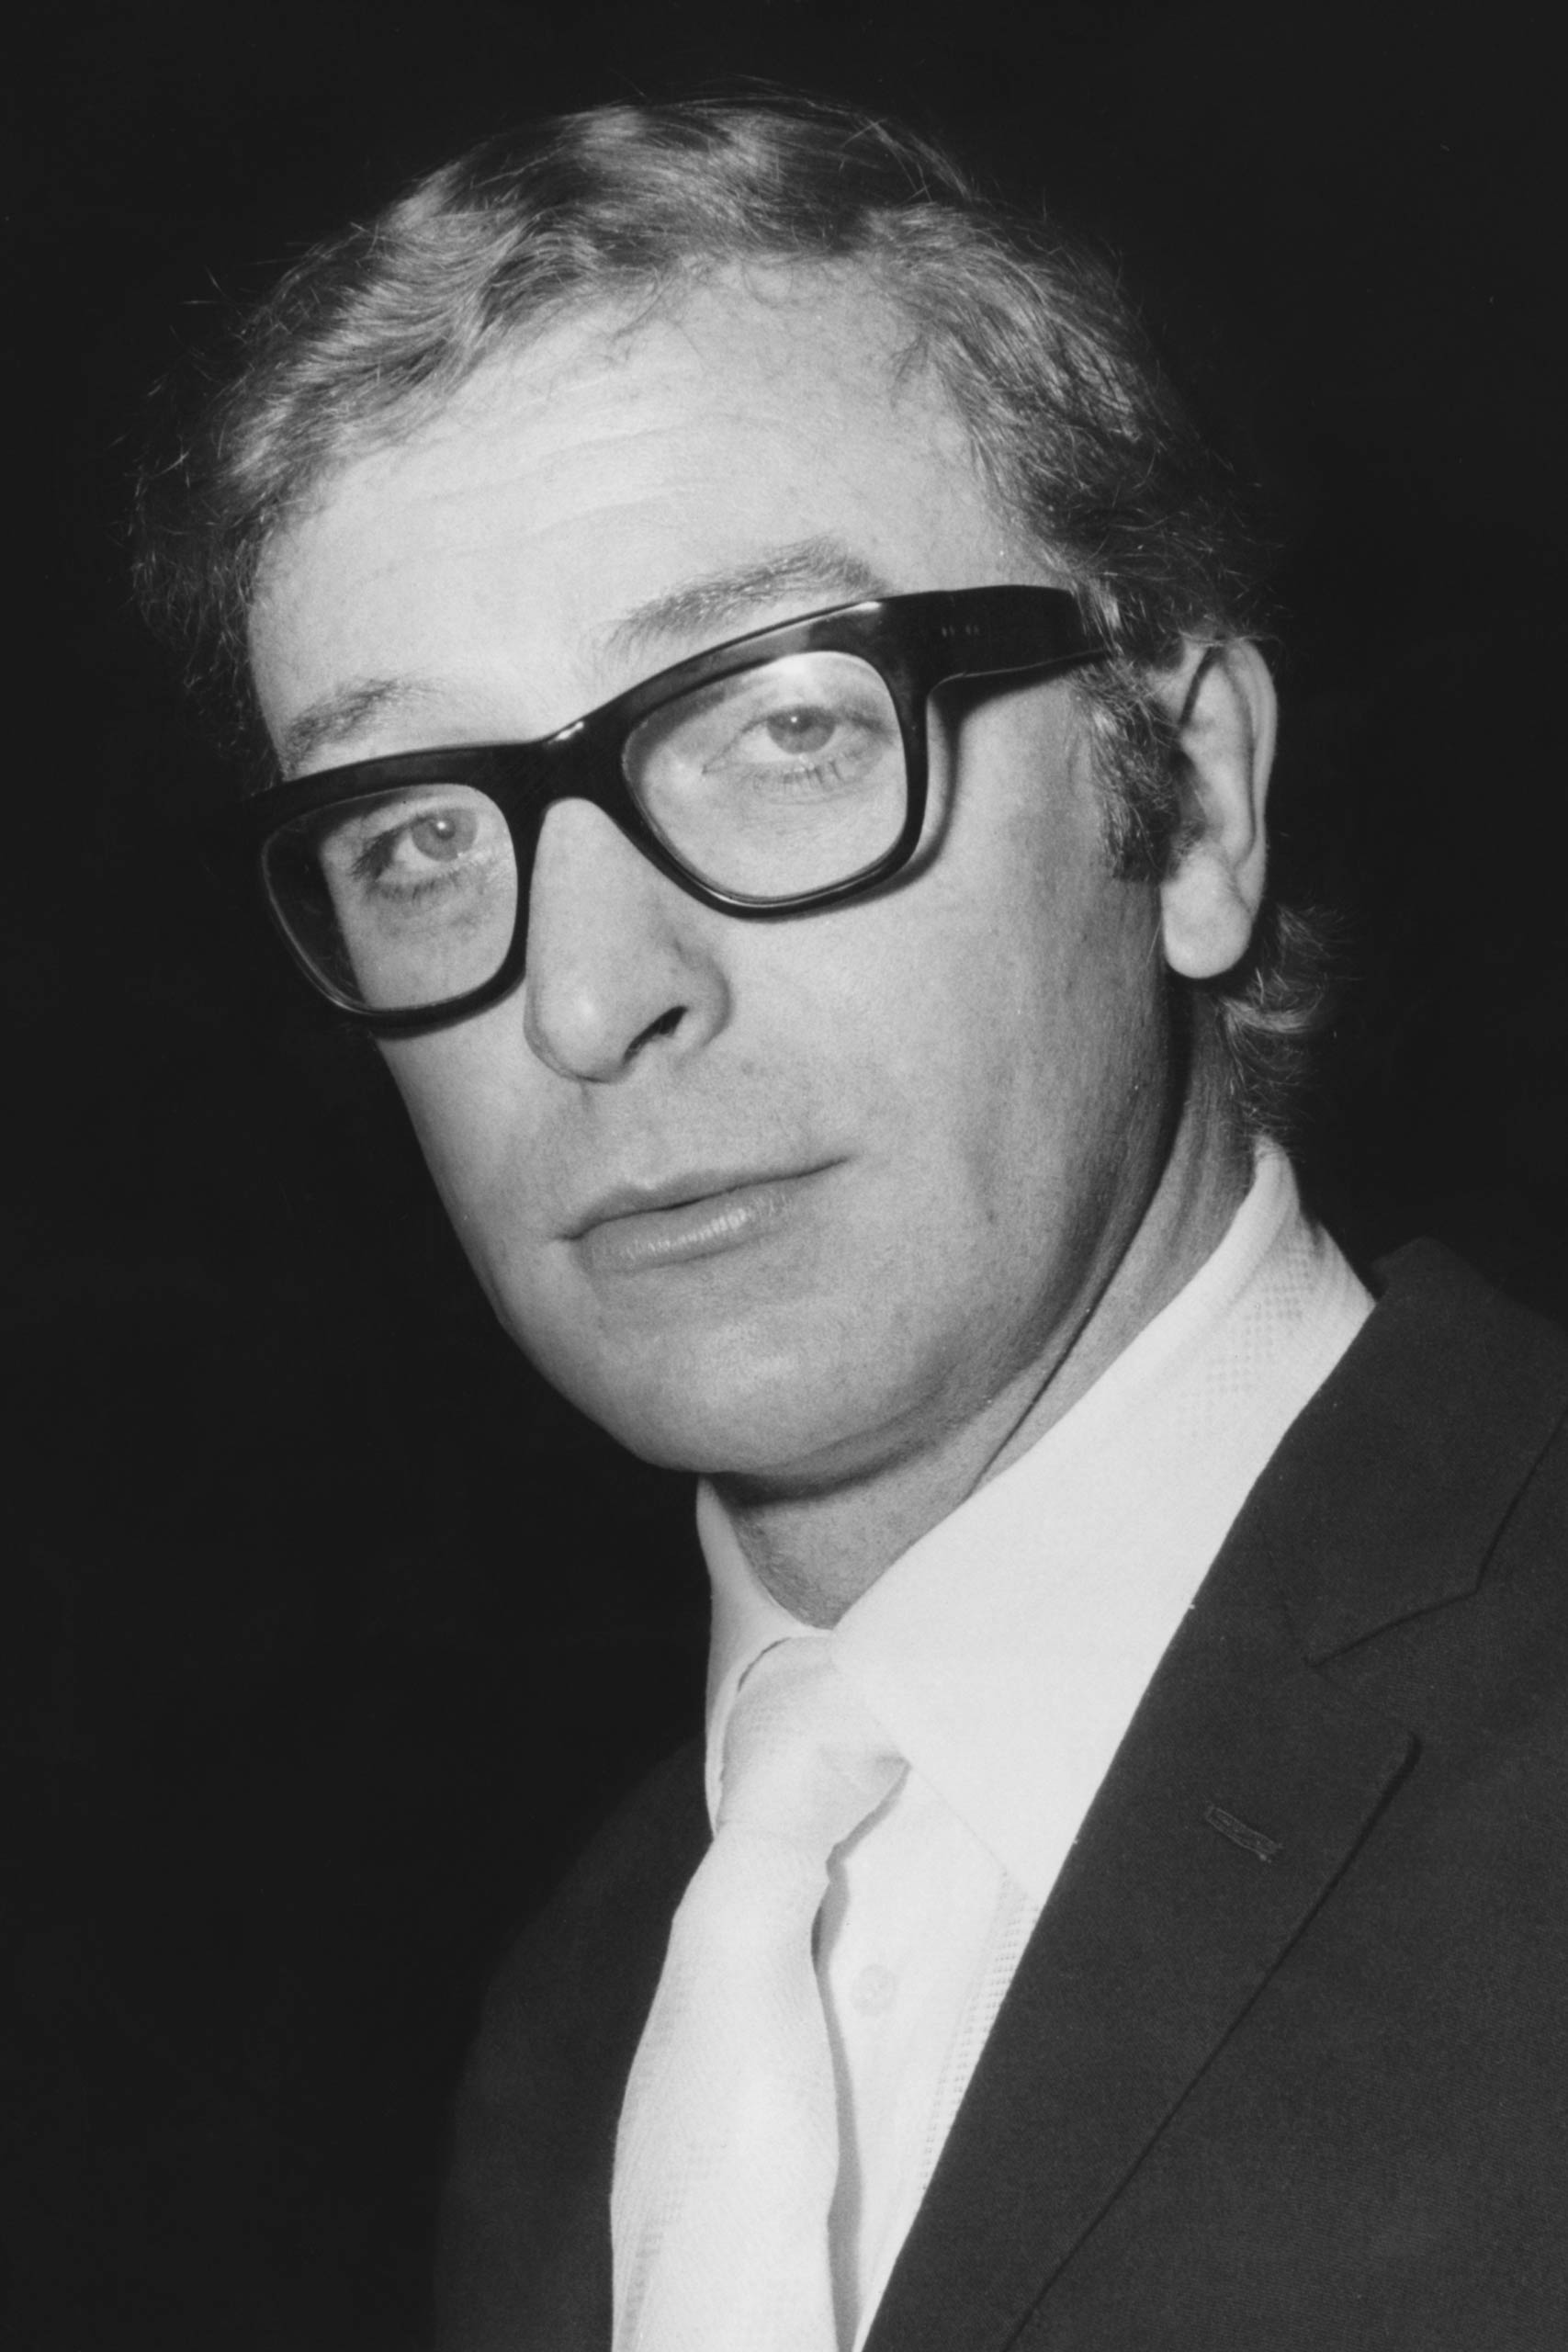 Michael Caine It takes decades of acting experience in order to be able to babysit eccentric billionaires with a penchant for wearing black. Born Maurice Joseph Micklewhite, the British actor would adopt the stage name “Michael Scott” and finally “Michael Caine” in the 1950s when he toured the various theaters in England to start off his career.